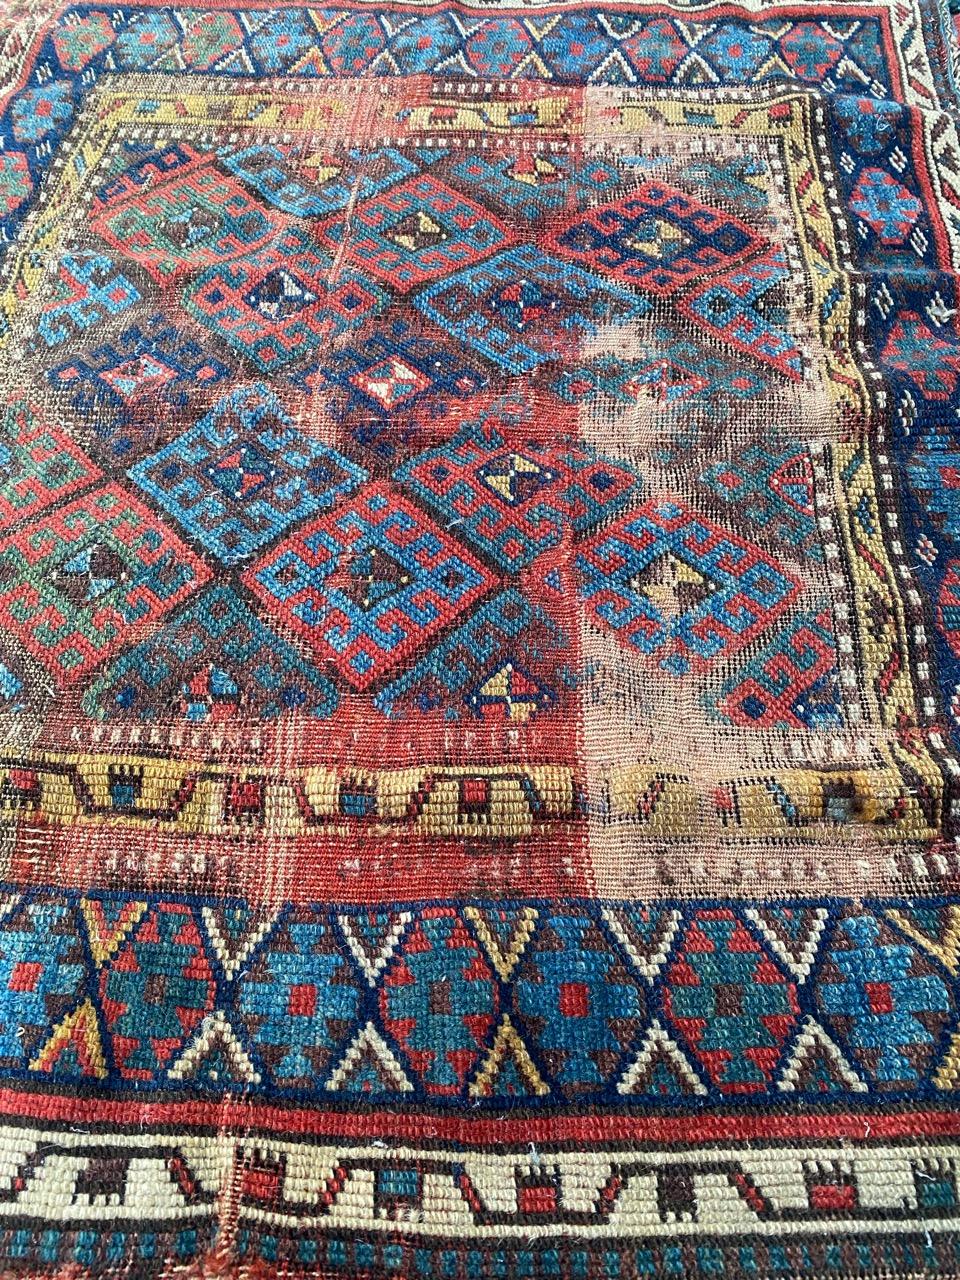 Bobyrug’s Pretty Antique Tribal Shahsavand Horse Cover Rug For Sale 6